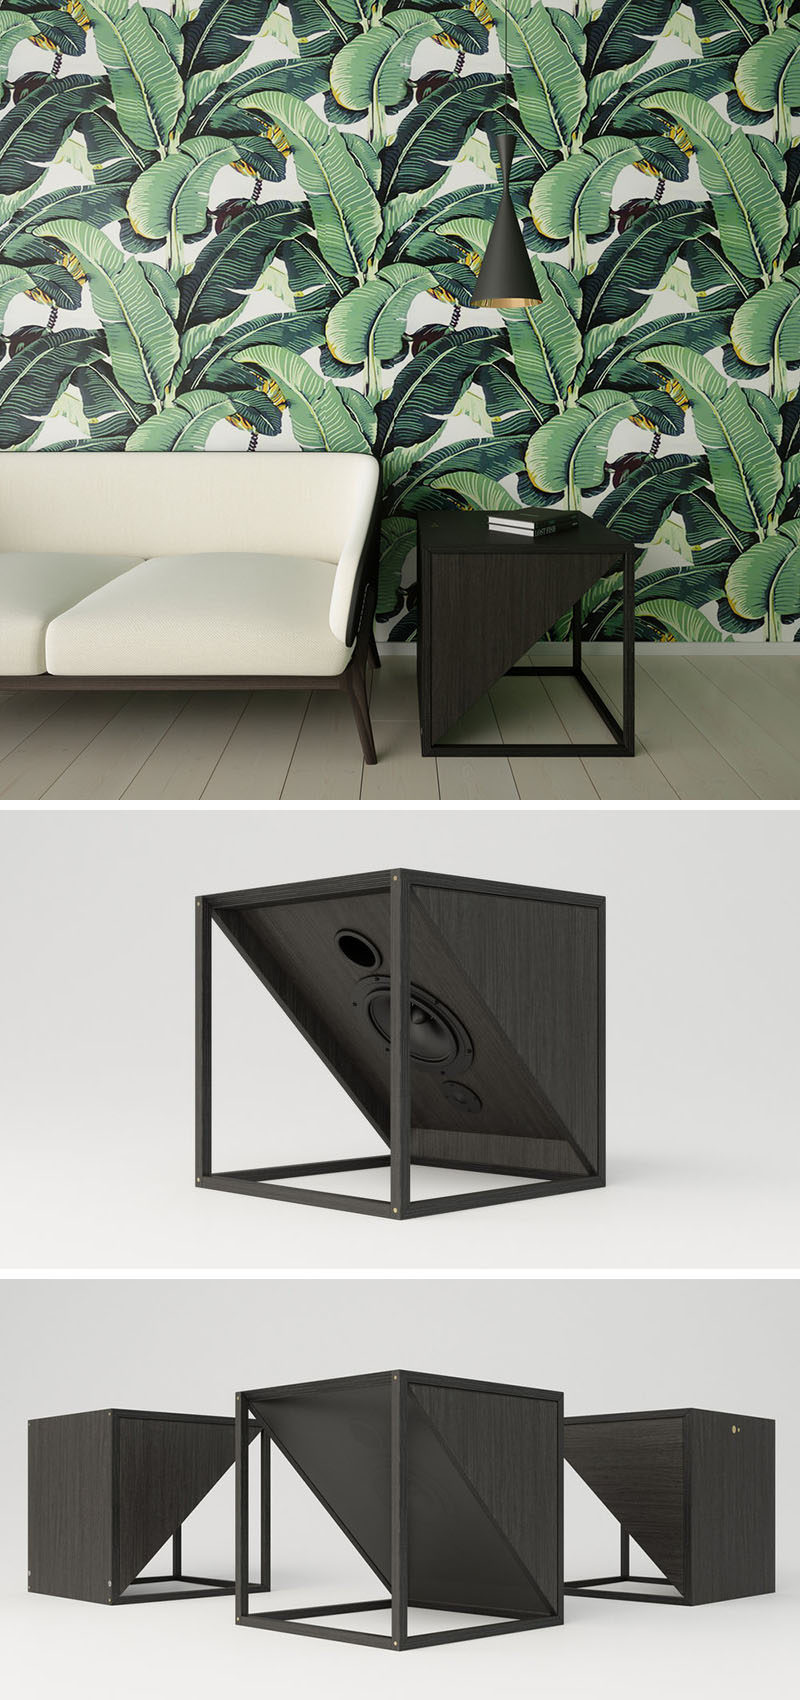 Design studio JLA, have created a minimalist side table that doesn't just create a place to place your book or table lamp, it's also your home or office sound system. #SideTable #WirelessSpeakers #FurnitureDesign